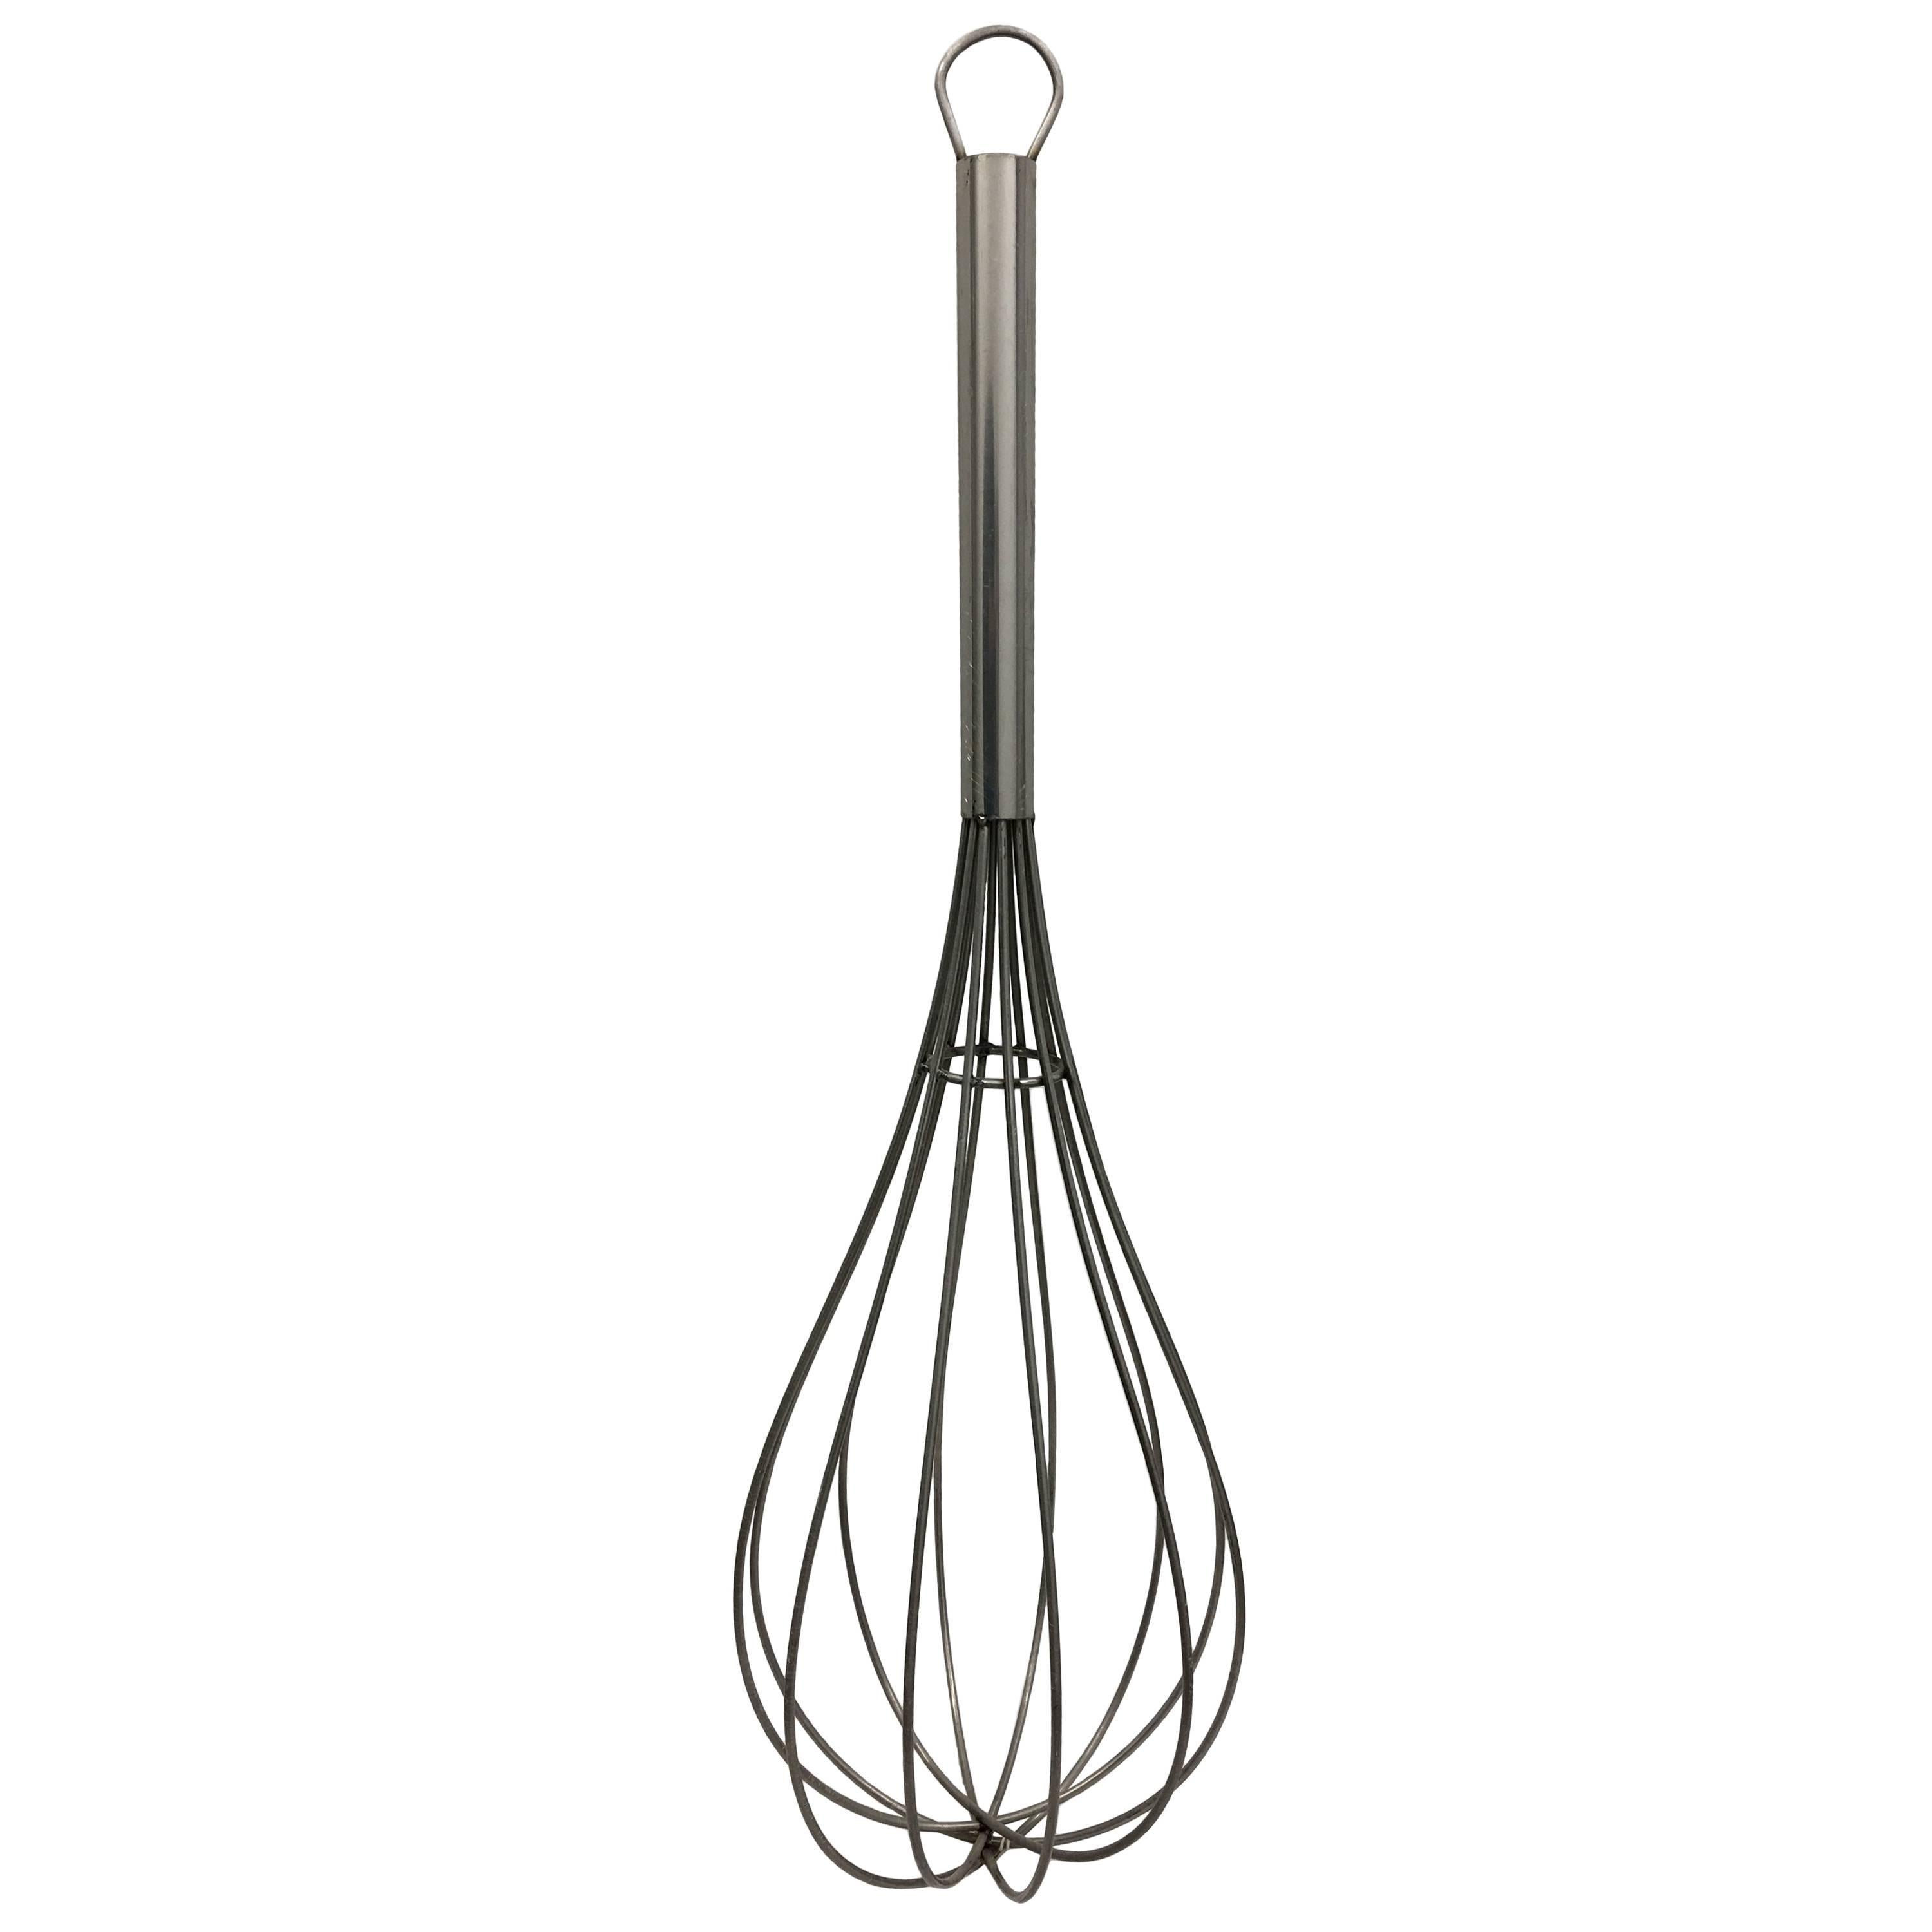 C. Jere Giant Metal Whisk Wall Art For Sale